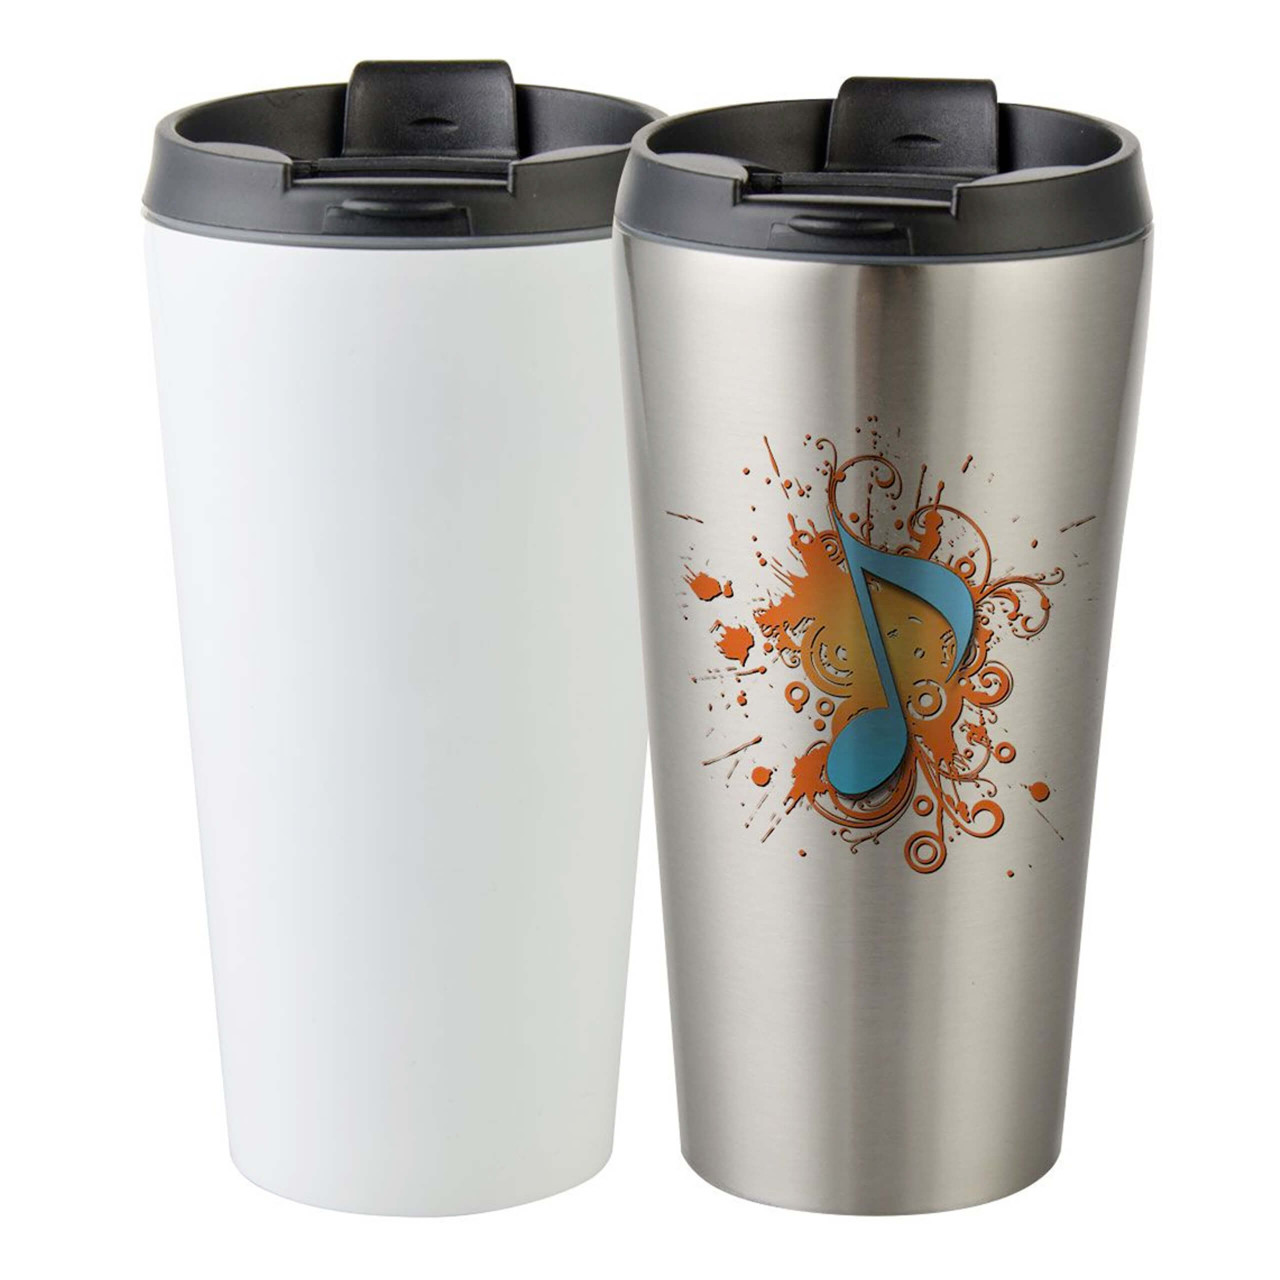 Sublimation On Stainless Steel Tumbler Or Mugs In 2 Ways